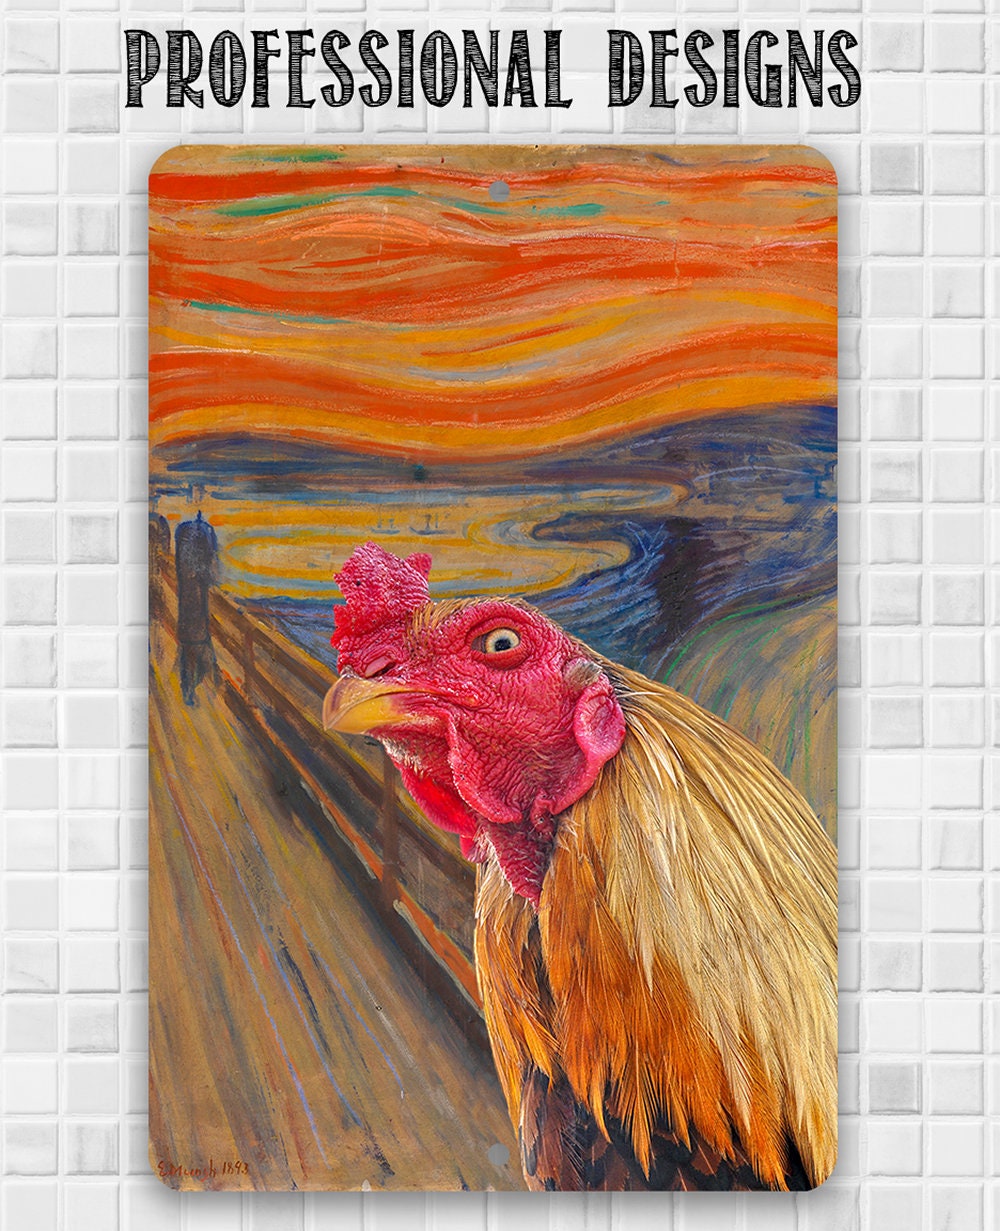 The Scream Painting - Interrupted by Rooster - Metal Sign Metal Sign Lone Star Art 